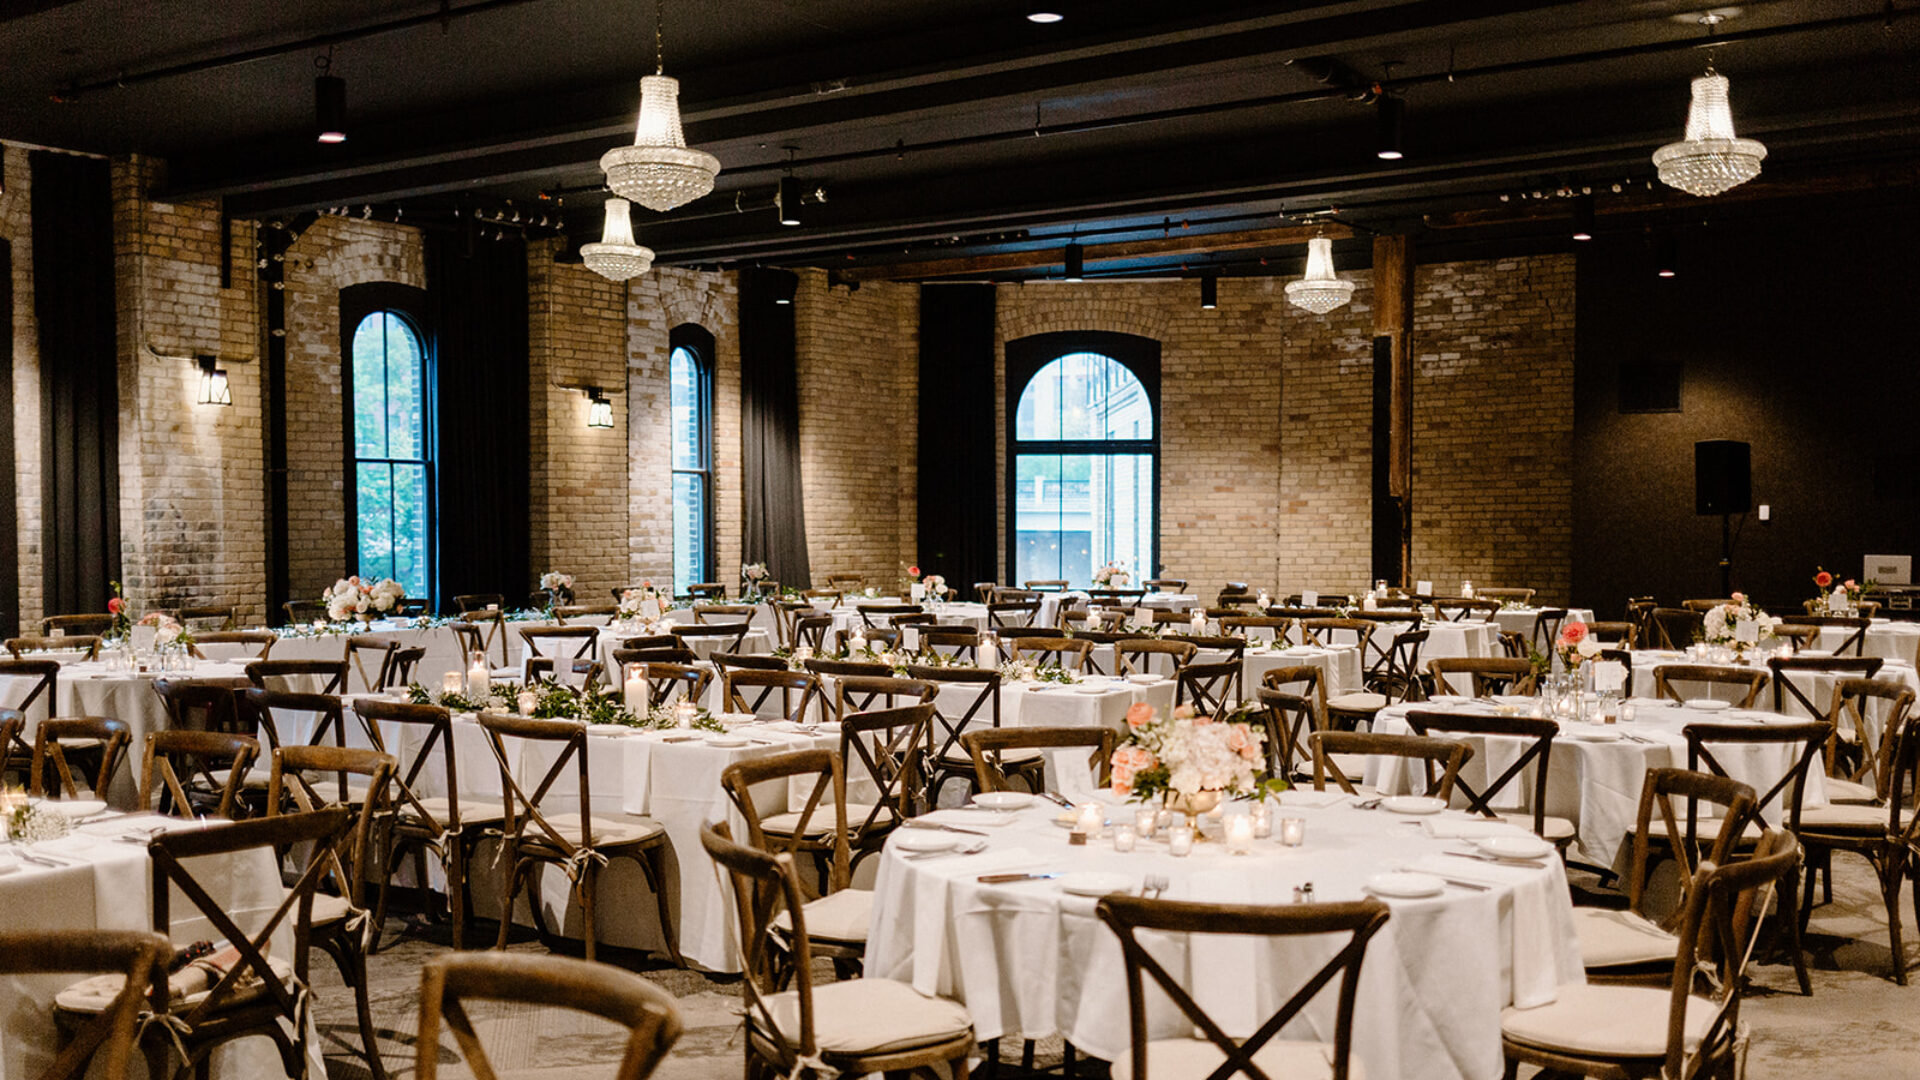 Brick wedding space at our hotel in downtown MPLS with banquet tables